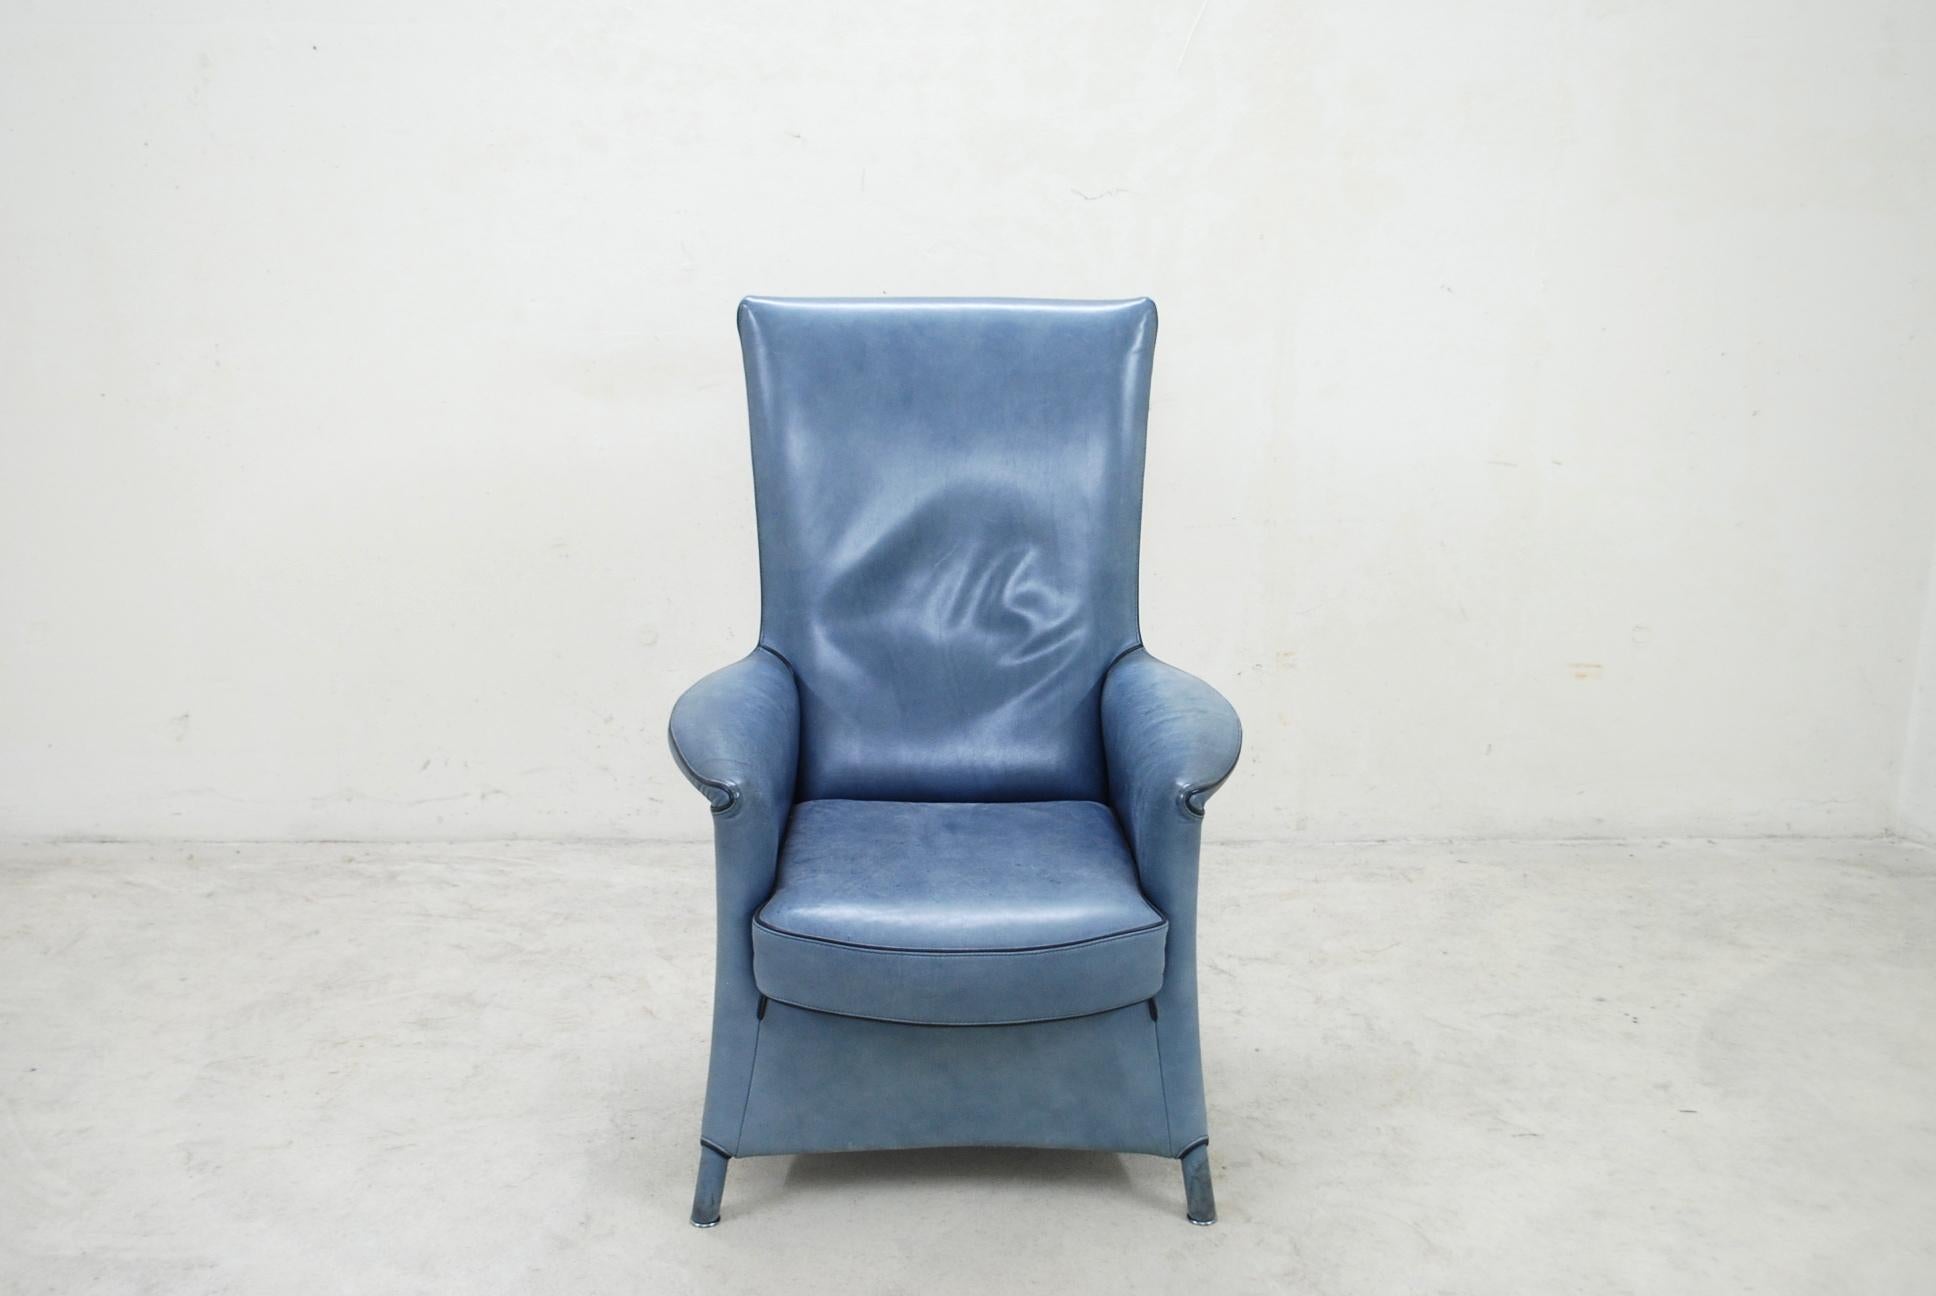 Modern Wittmann Leather Armchair Chair Model Alta Design by Paolo Piva